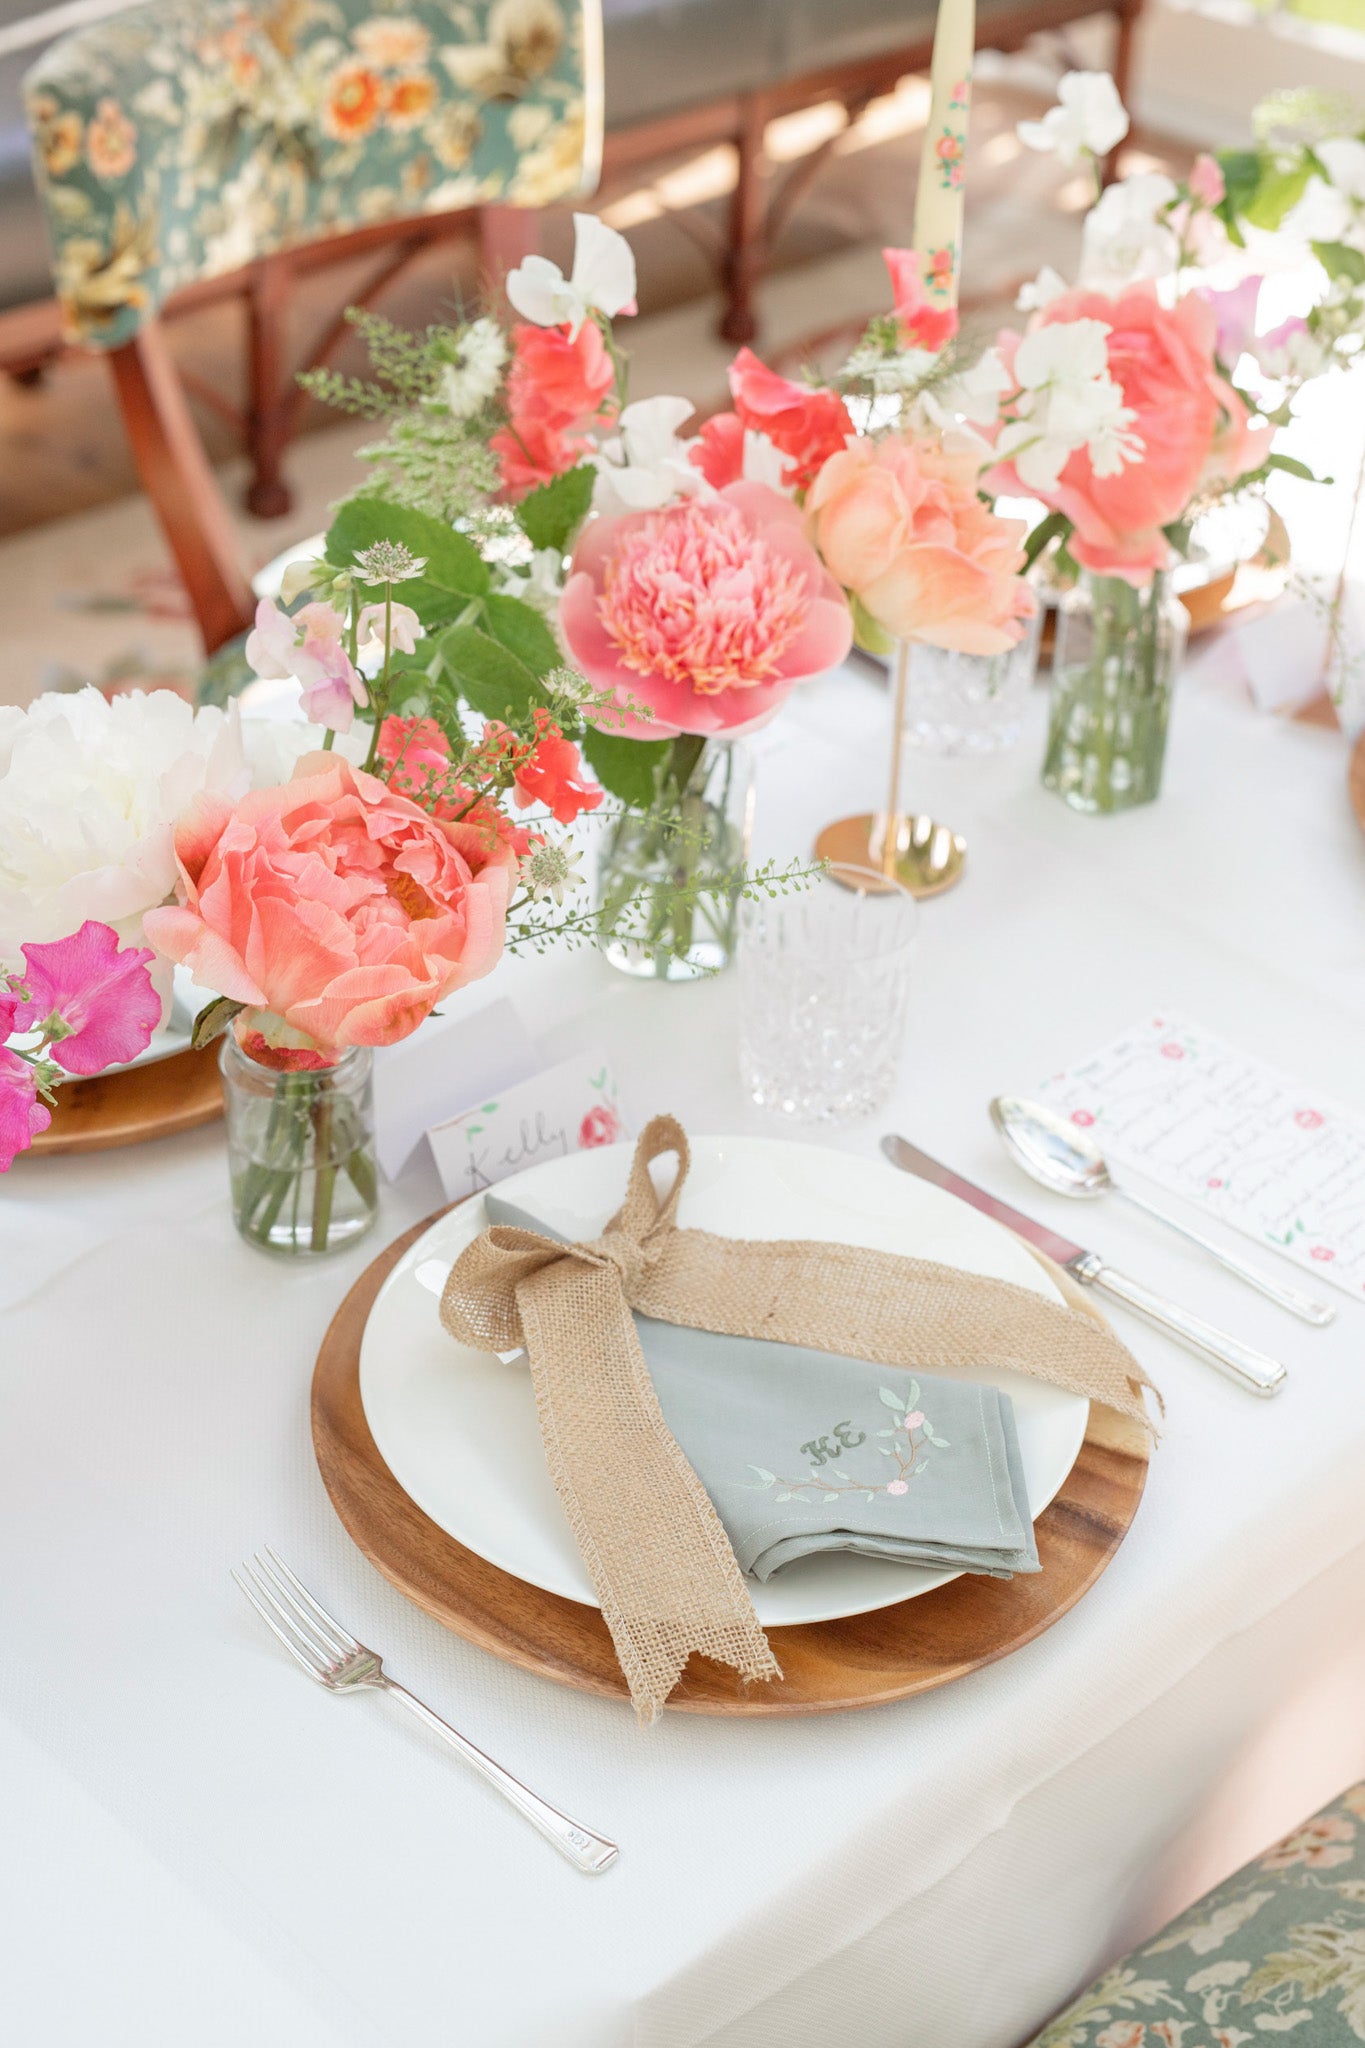 Details of a spring tablescape by Rosanna Falconer for TENCEL